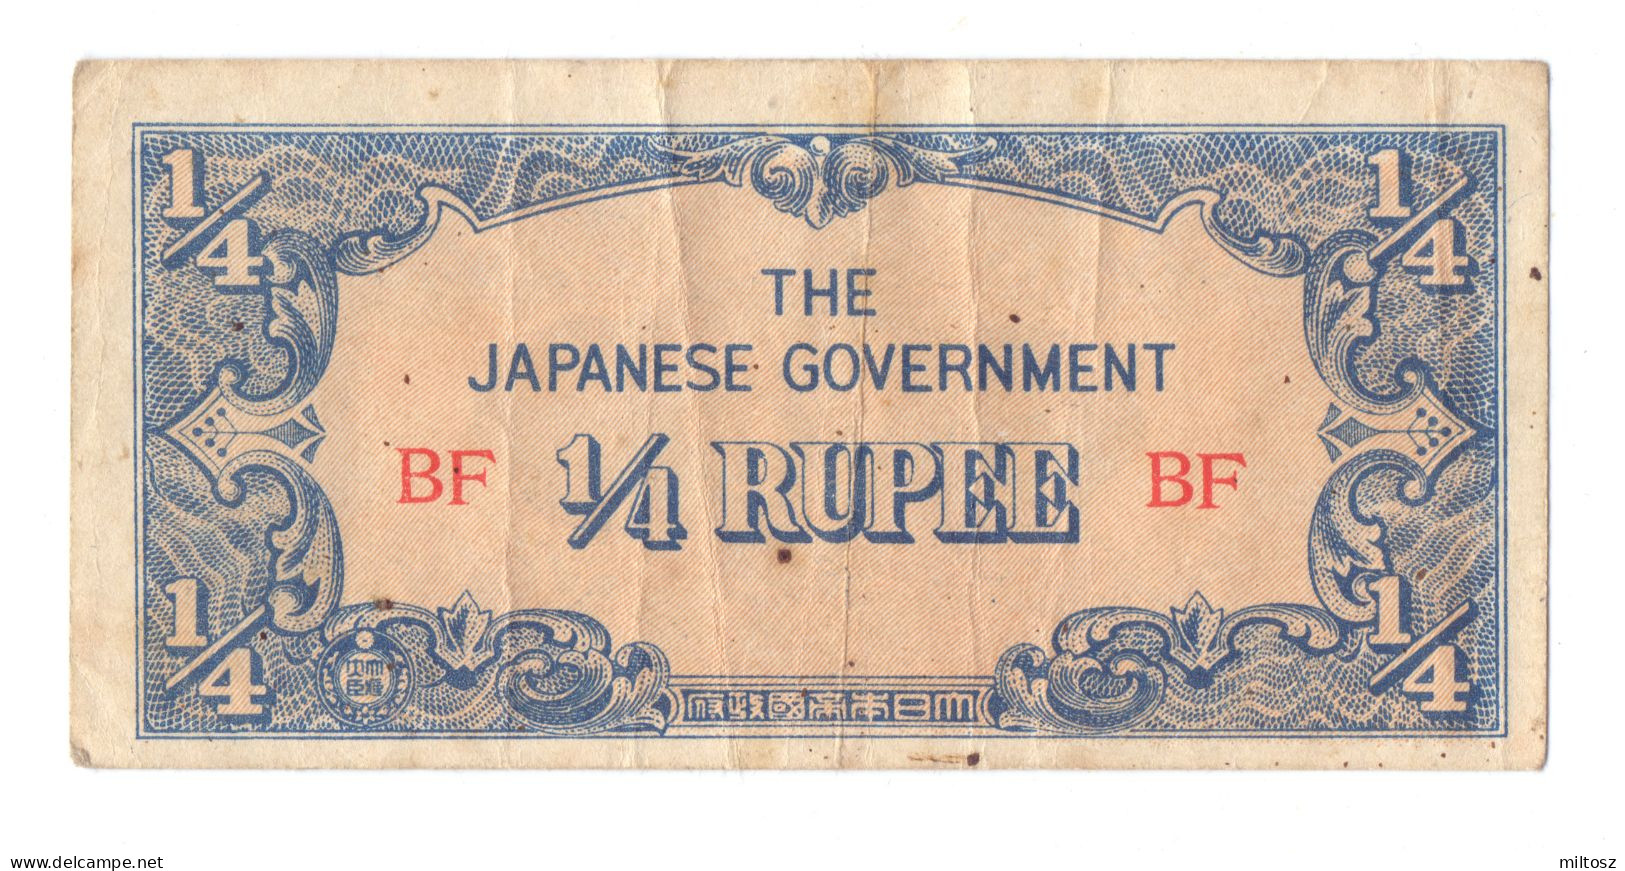 India 1/4 Rupee 1942 Japanese Occupation WWII - Indien